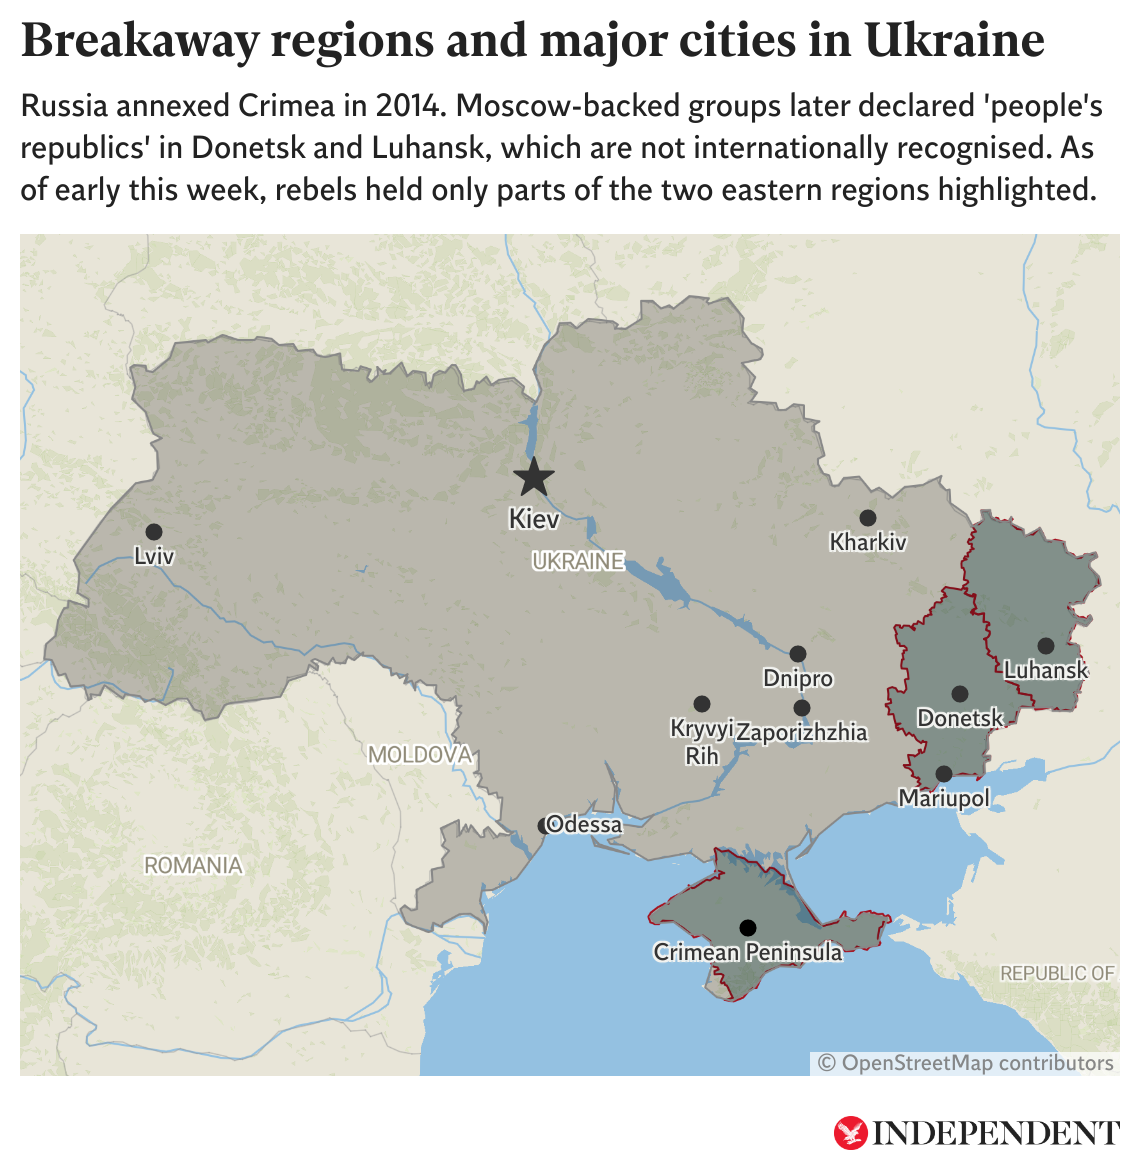 This map shows major cities in Ukraine as well as Moscow-backed separatist regions. As of early this week, rebels held only parts of the Donetsk and Luhansk regions highlighted